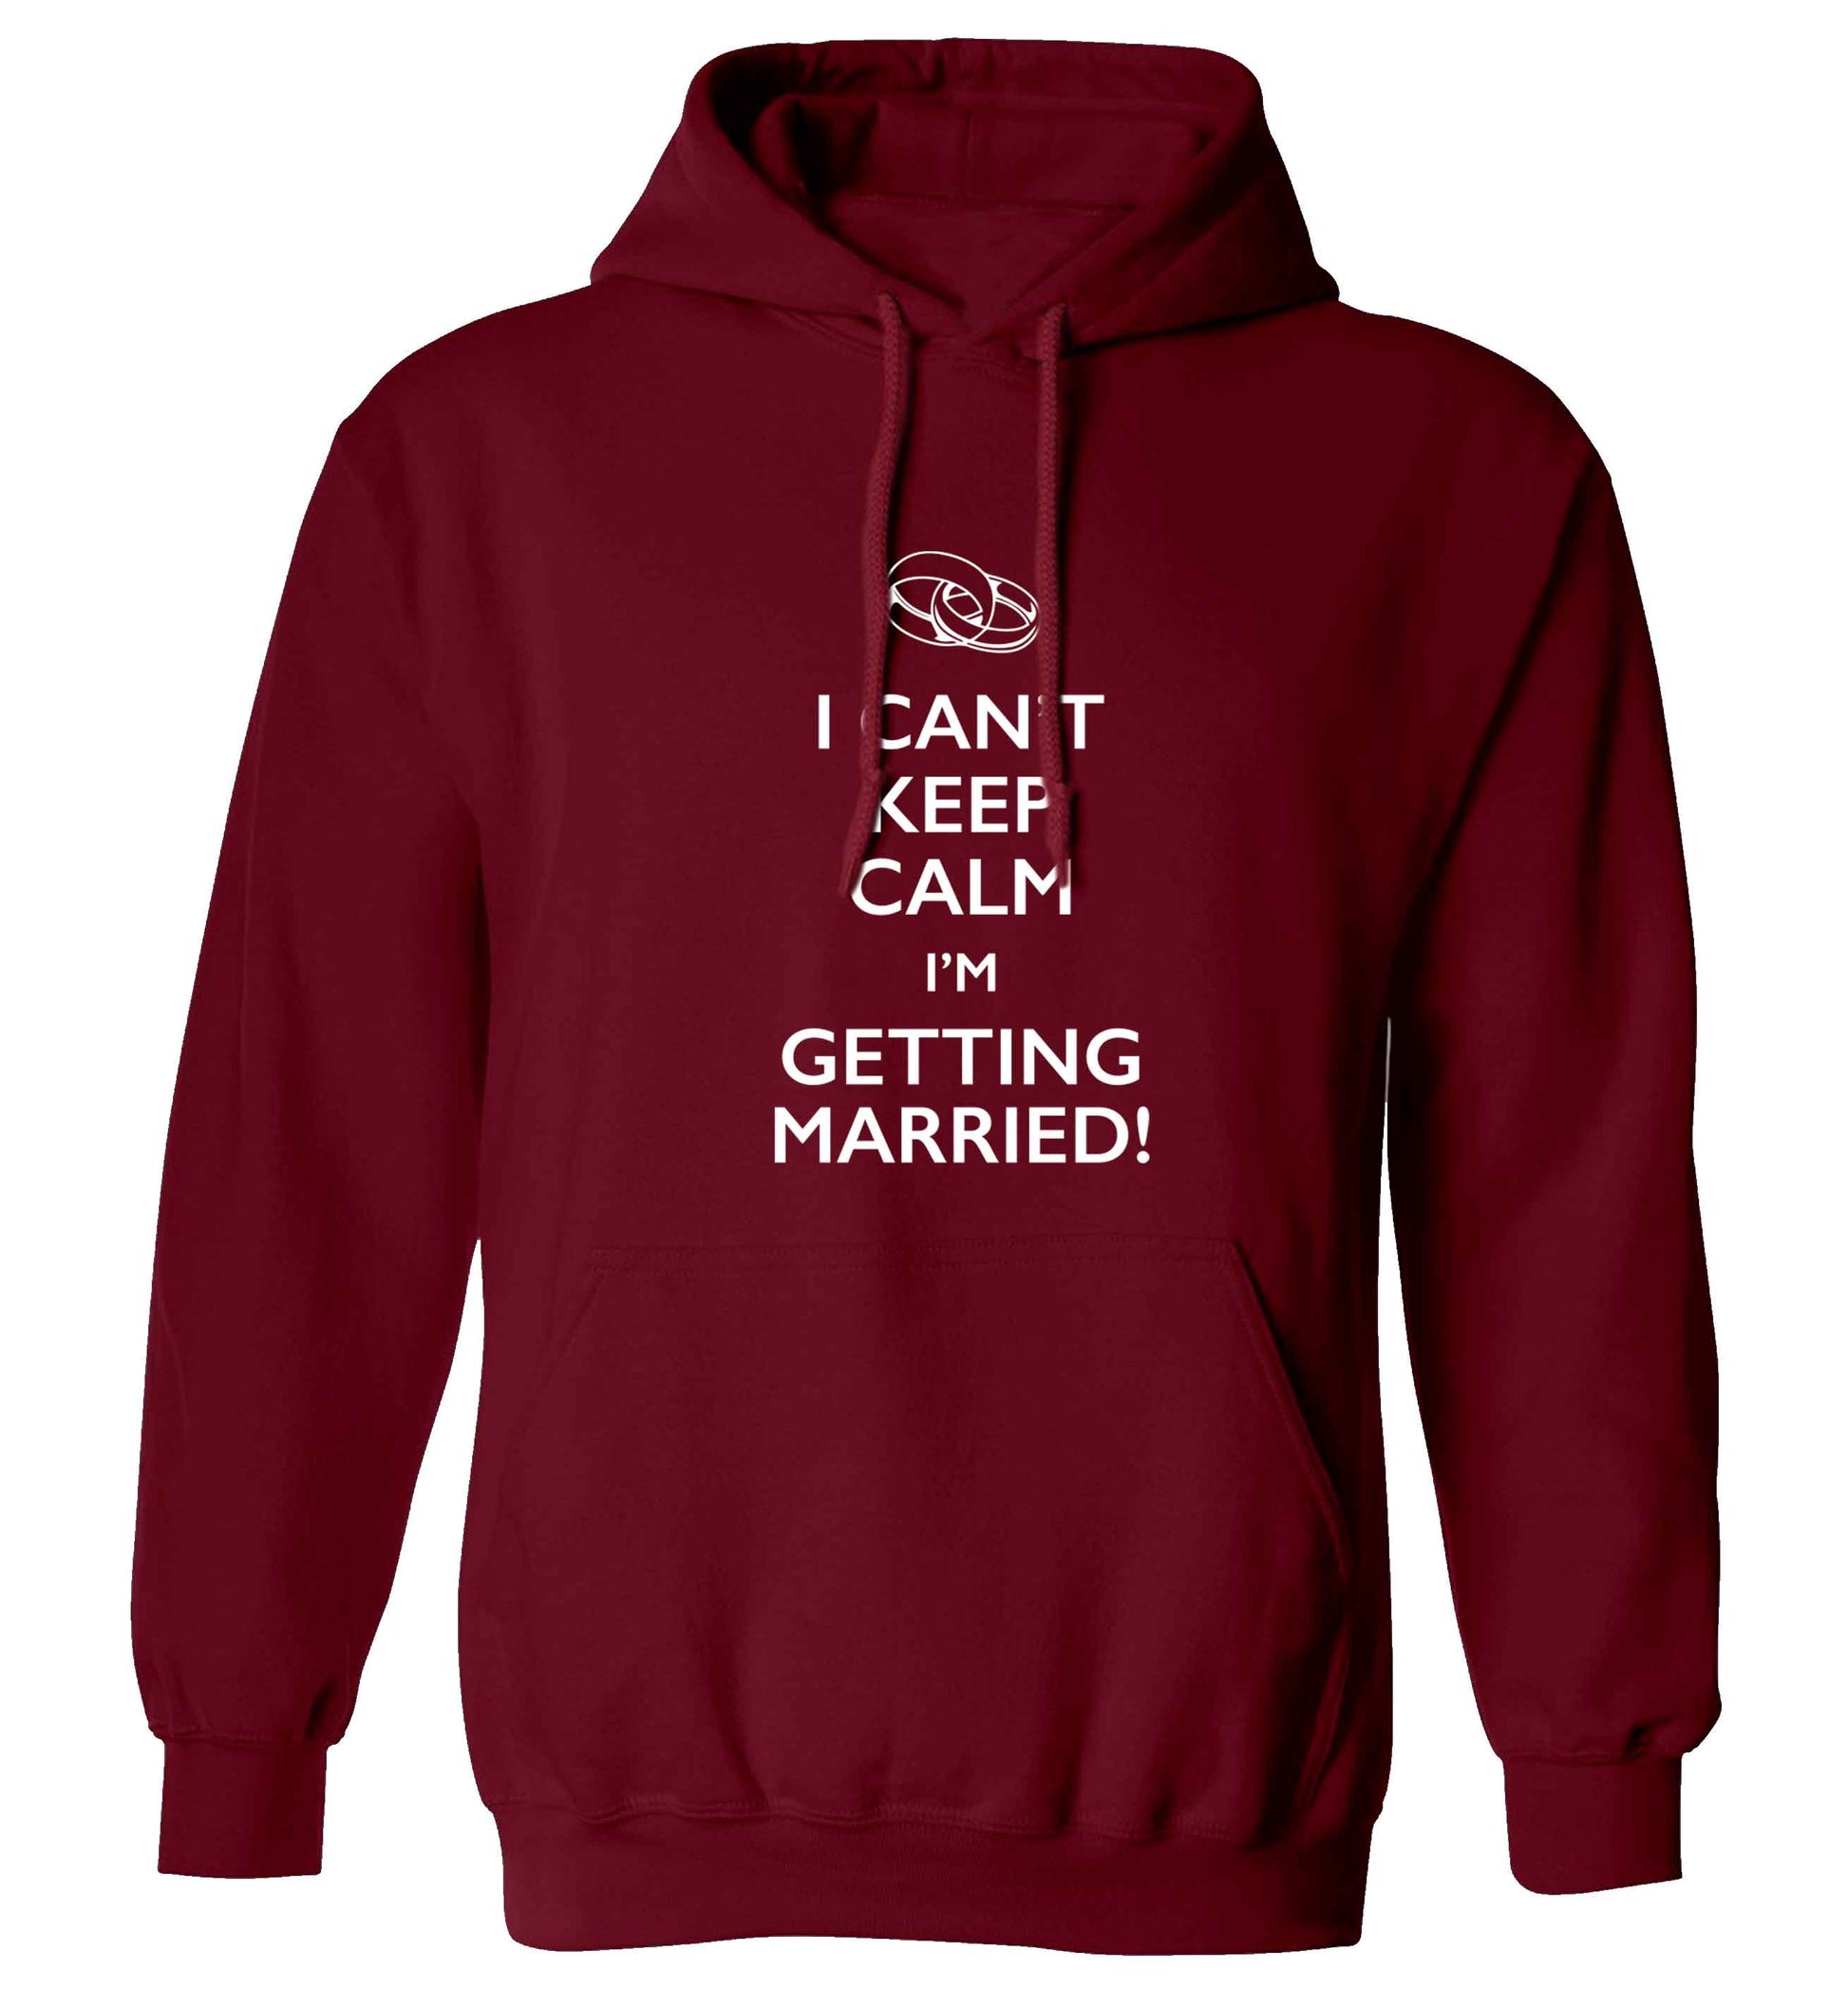 I can't keep calm I'm getting married! adults unisex maroon hoodie 2XL